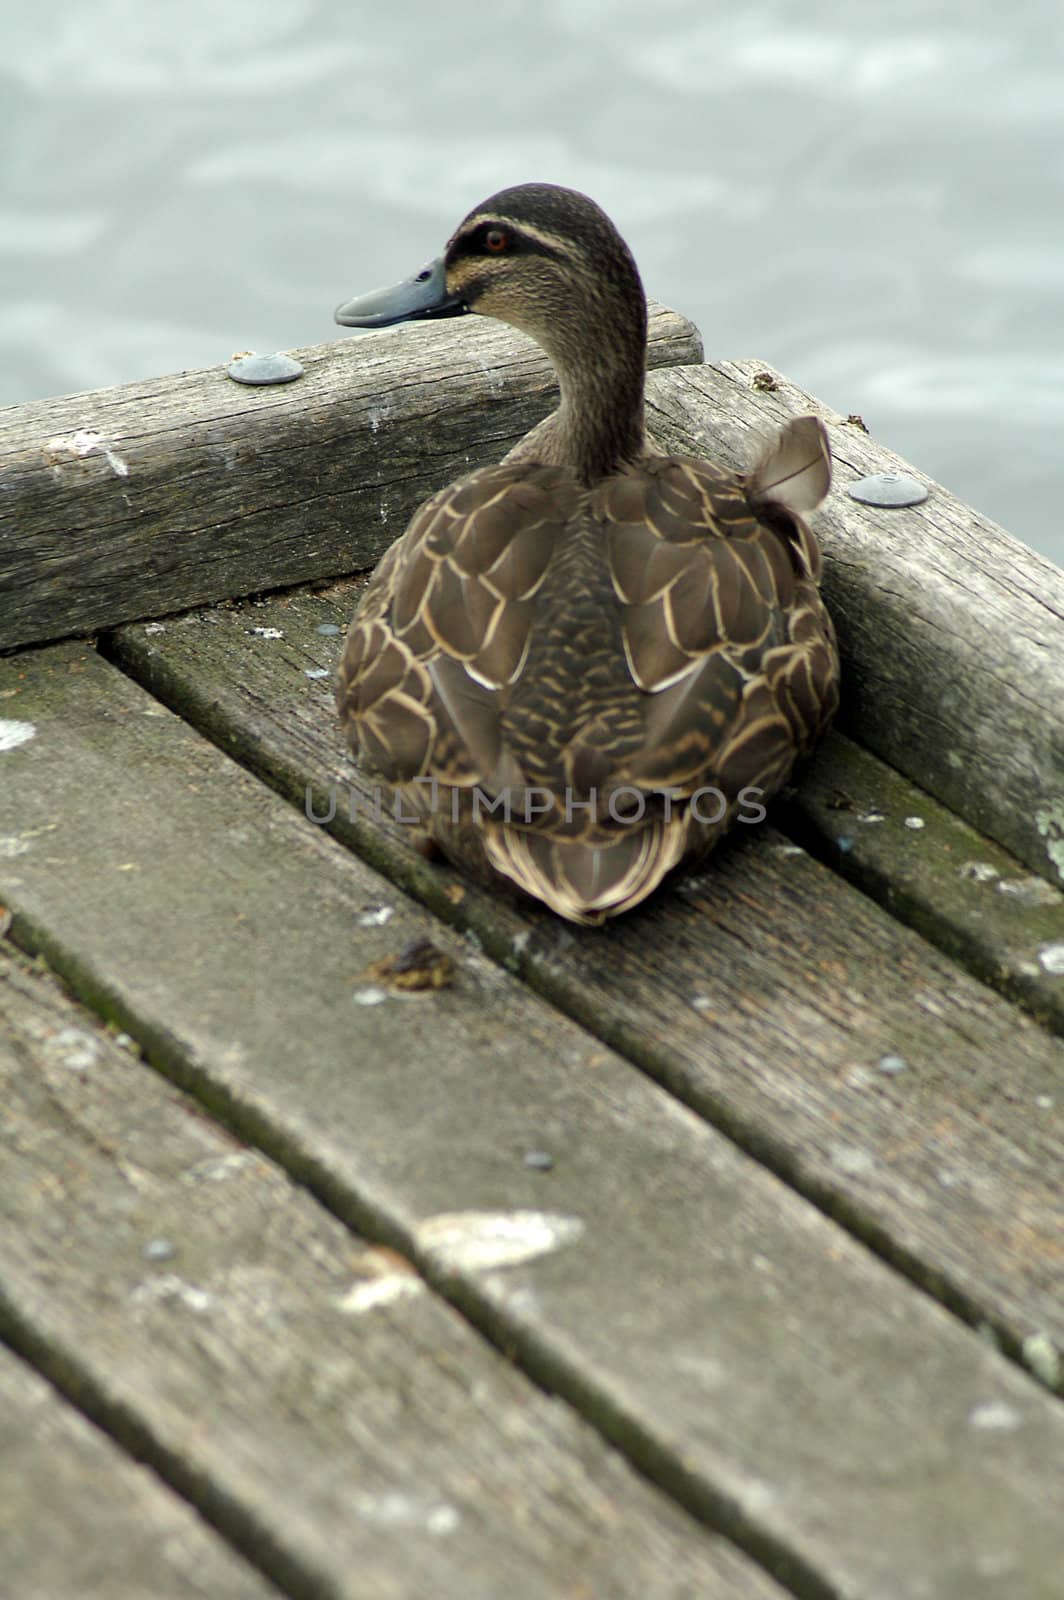 brown duck sitting on wooden docks, water in background, autumn time